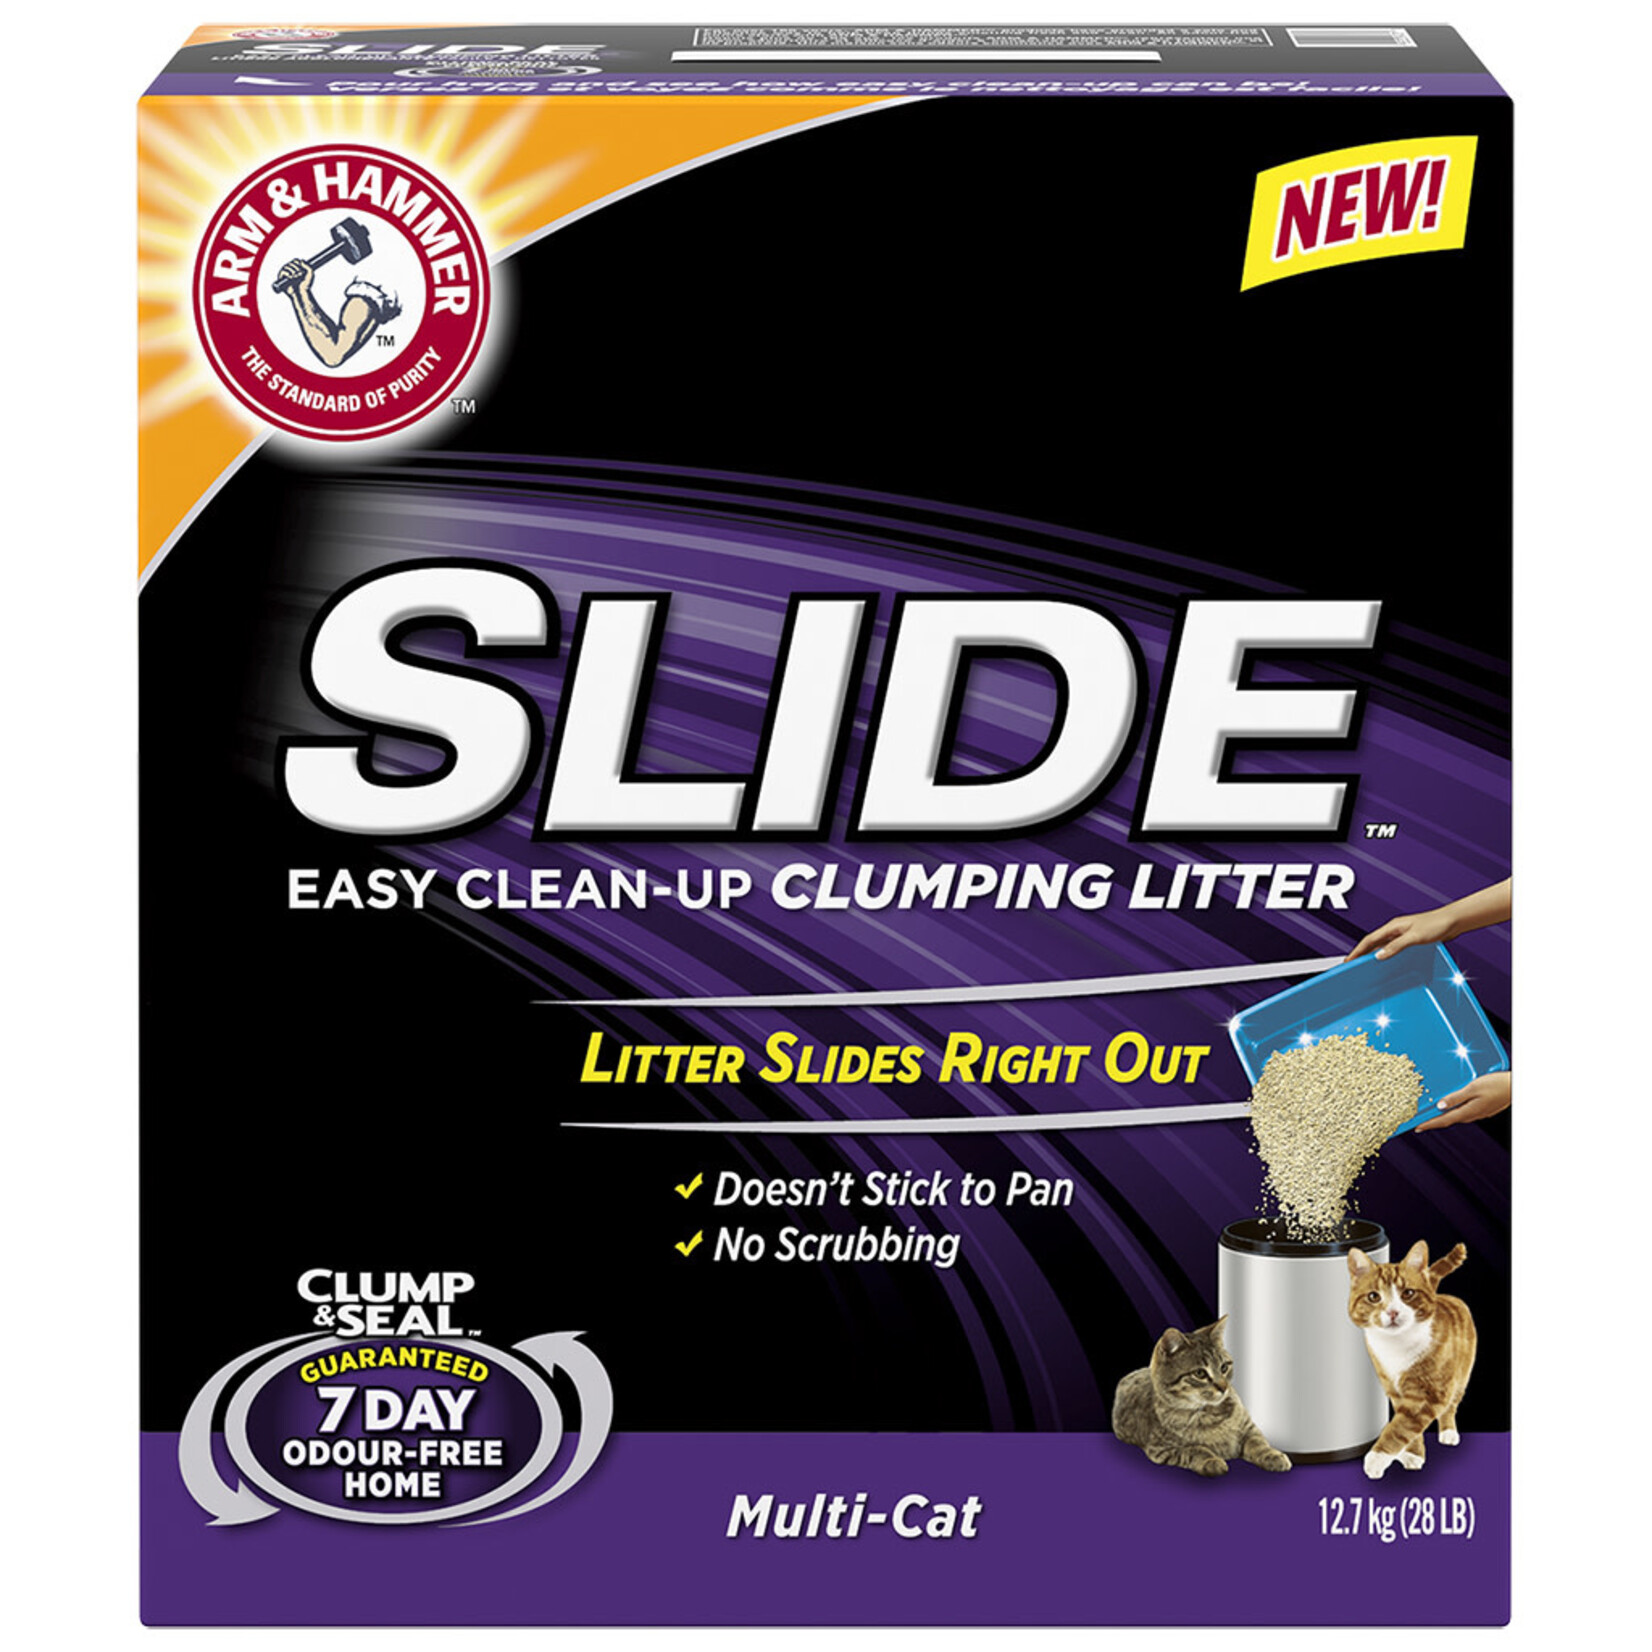 PESTELL PET PRODUCTS A&H Slide Clumping Litter Multi-Cat 6.4KG